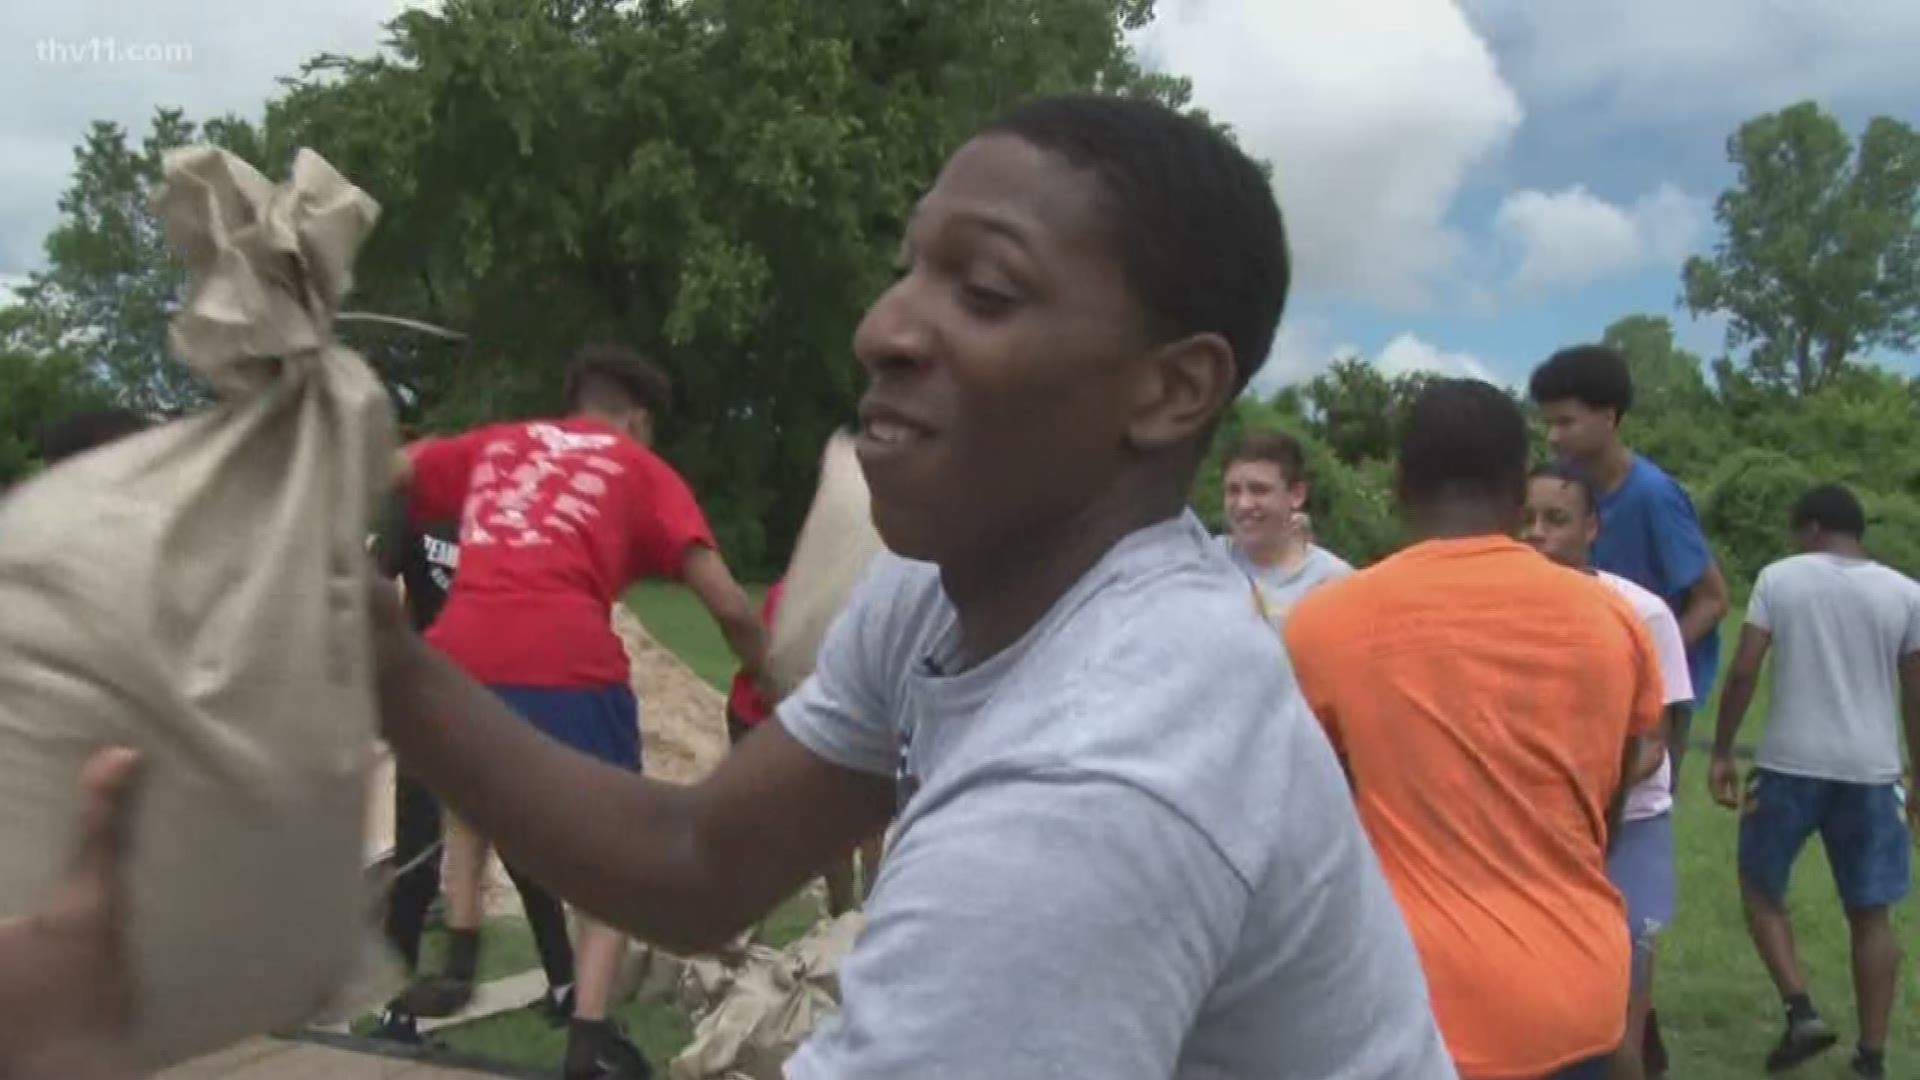 The North Little Rock High School basketball team is helping the community by filling sandbags.